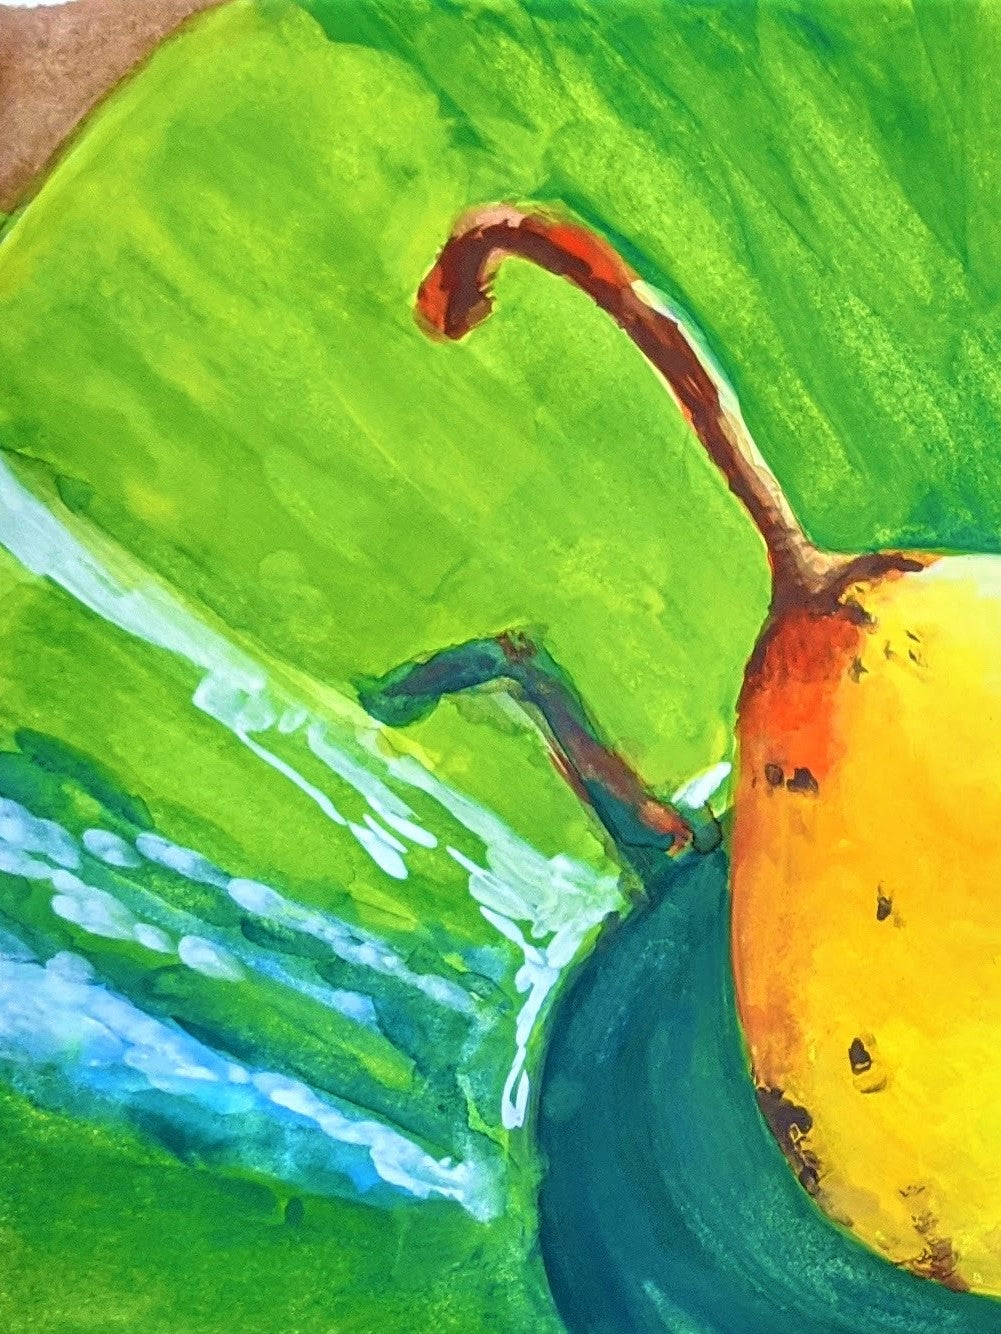 Pear and shadows gouche painting detail